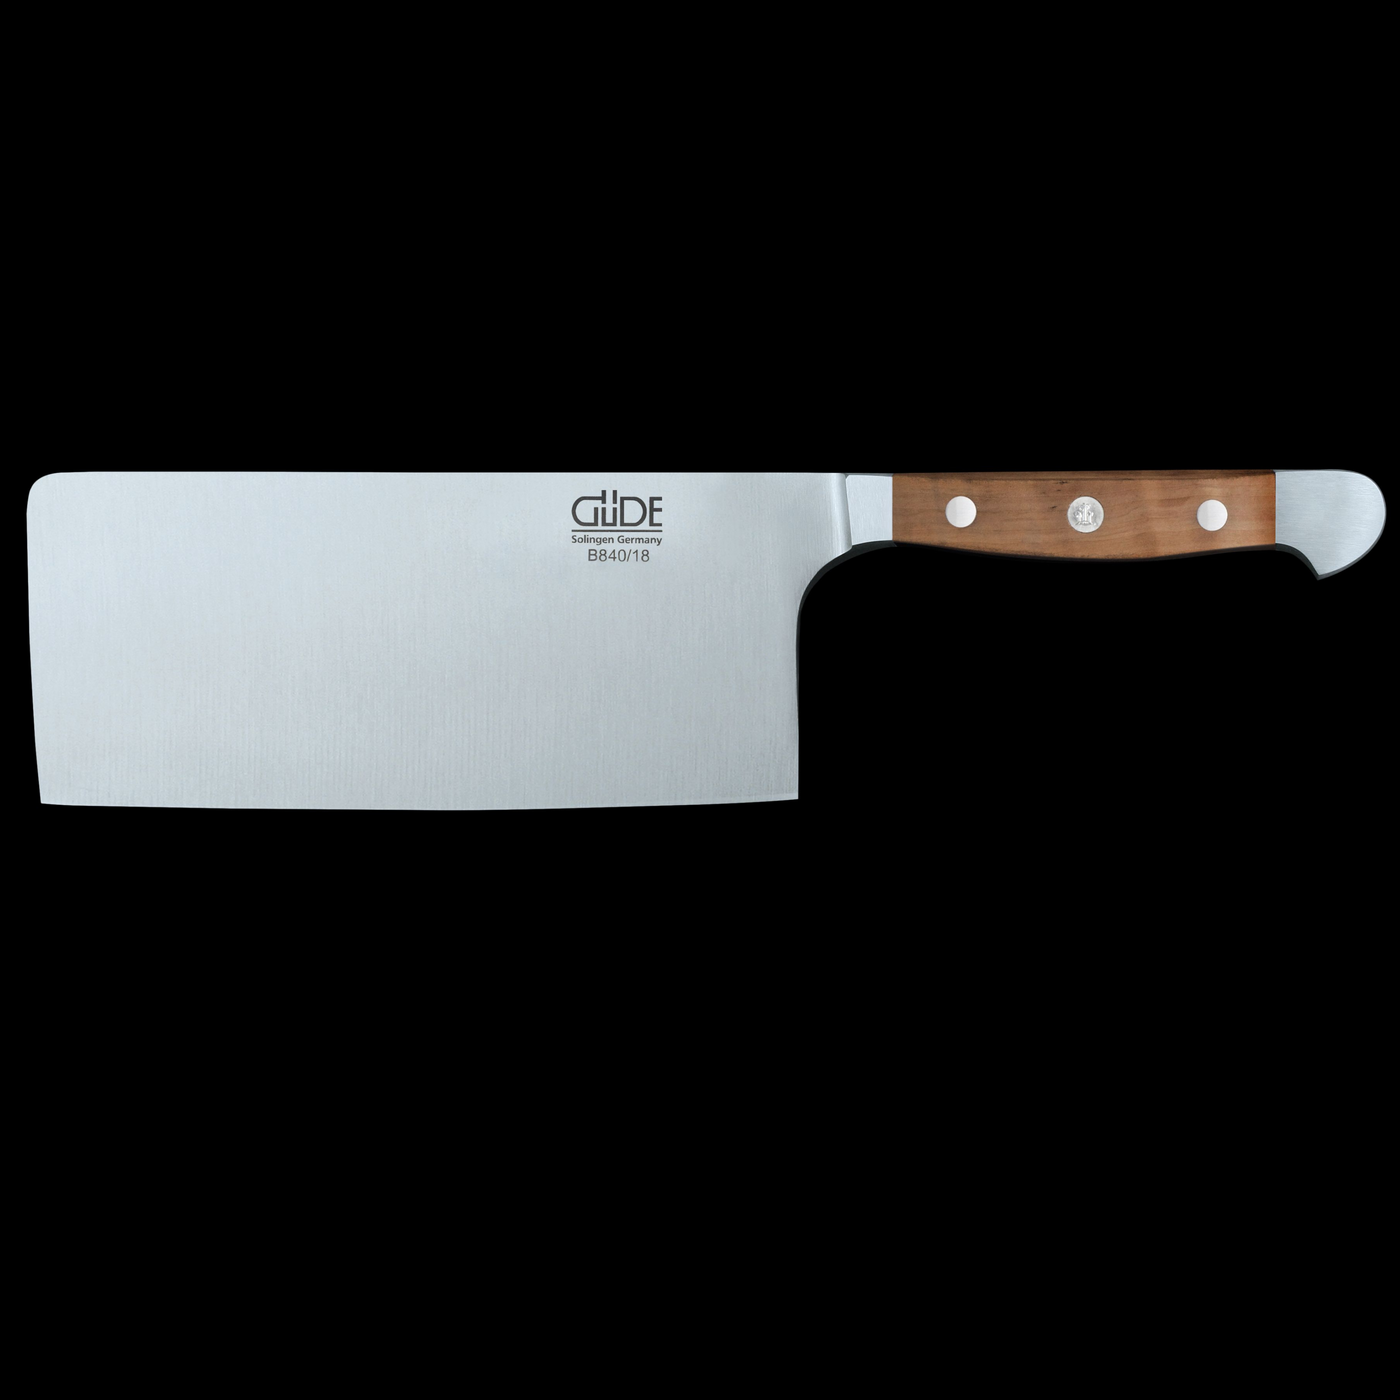 Gude Alpha Pear Cleaver Knife With Pearwood Handle, 7-In - Kitchen Universe